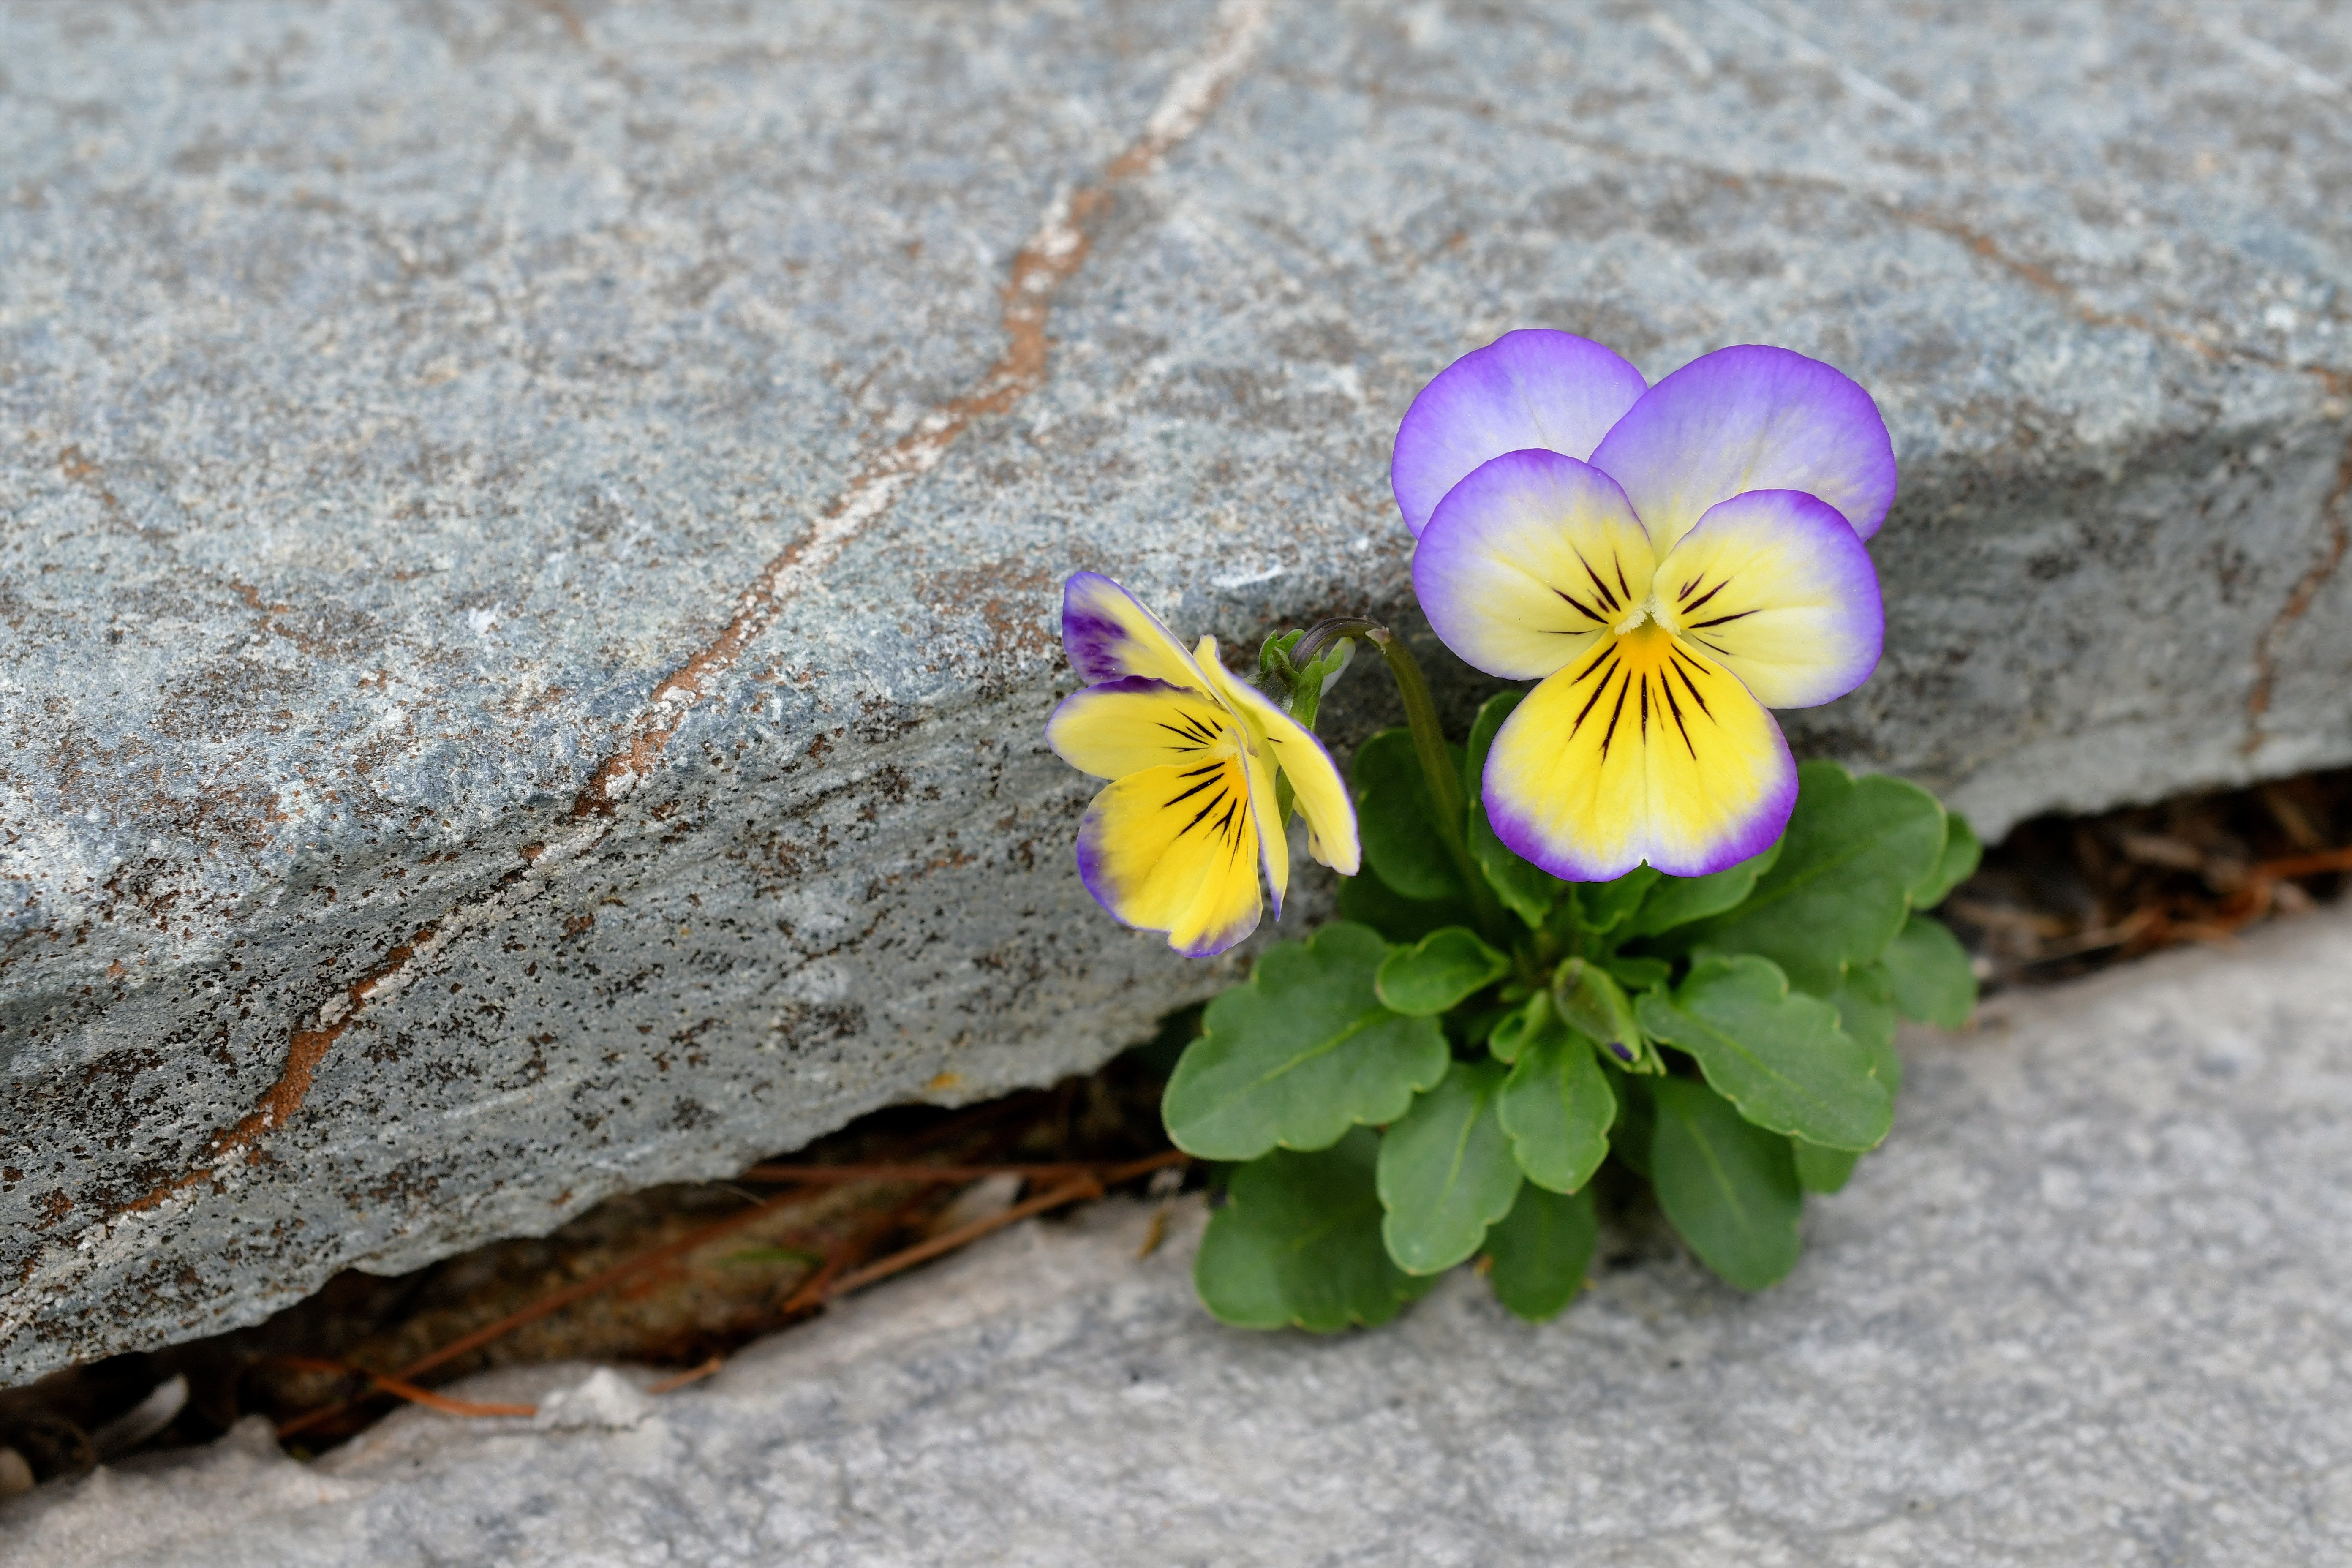 purple-pansy-growing-out-of-pavement